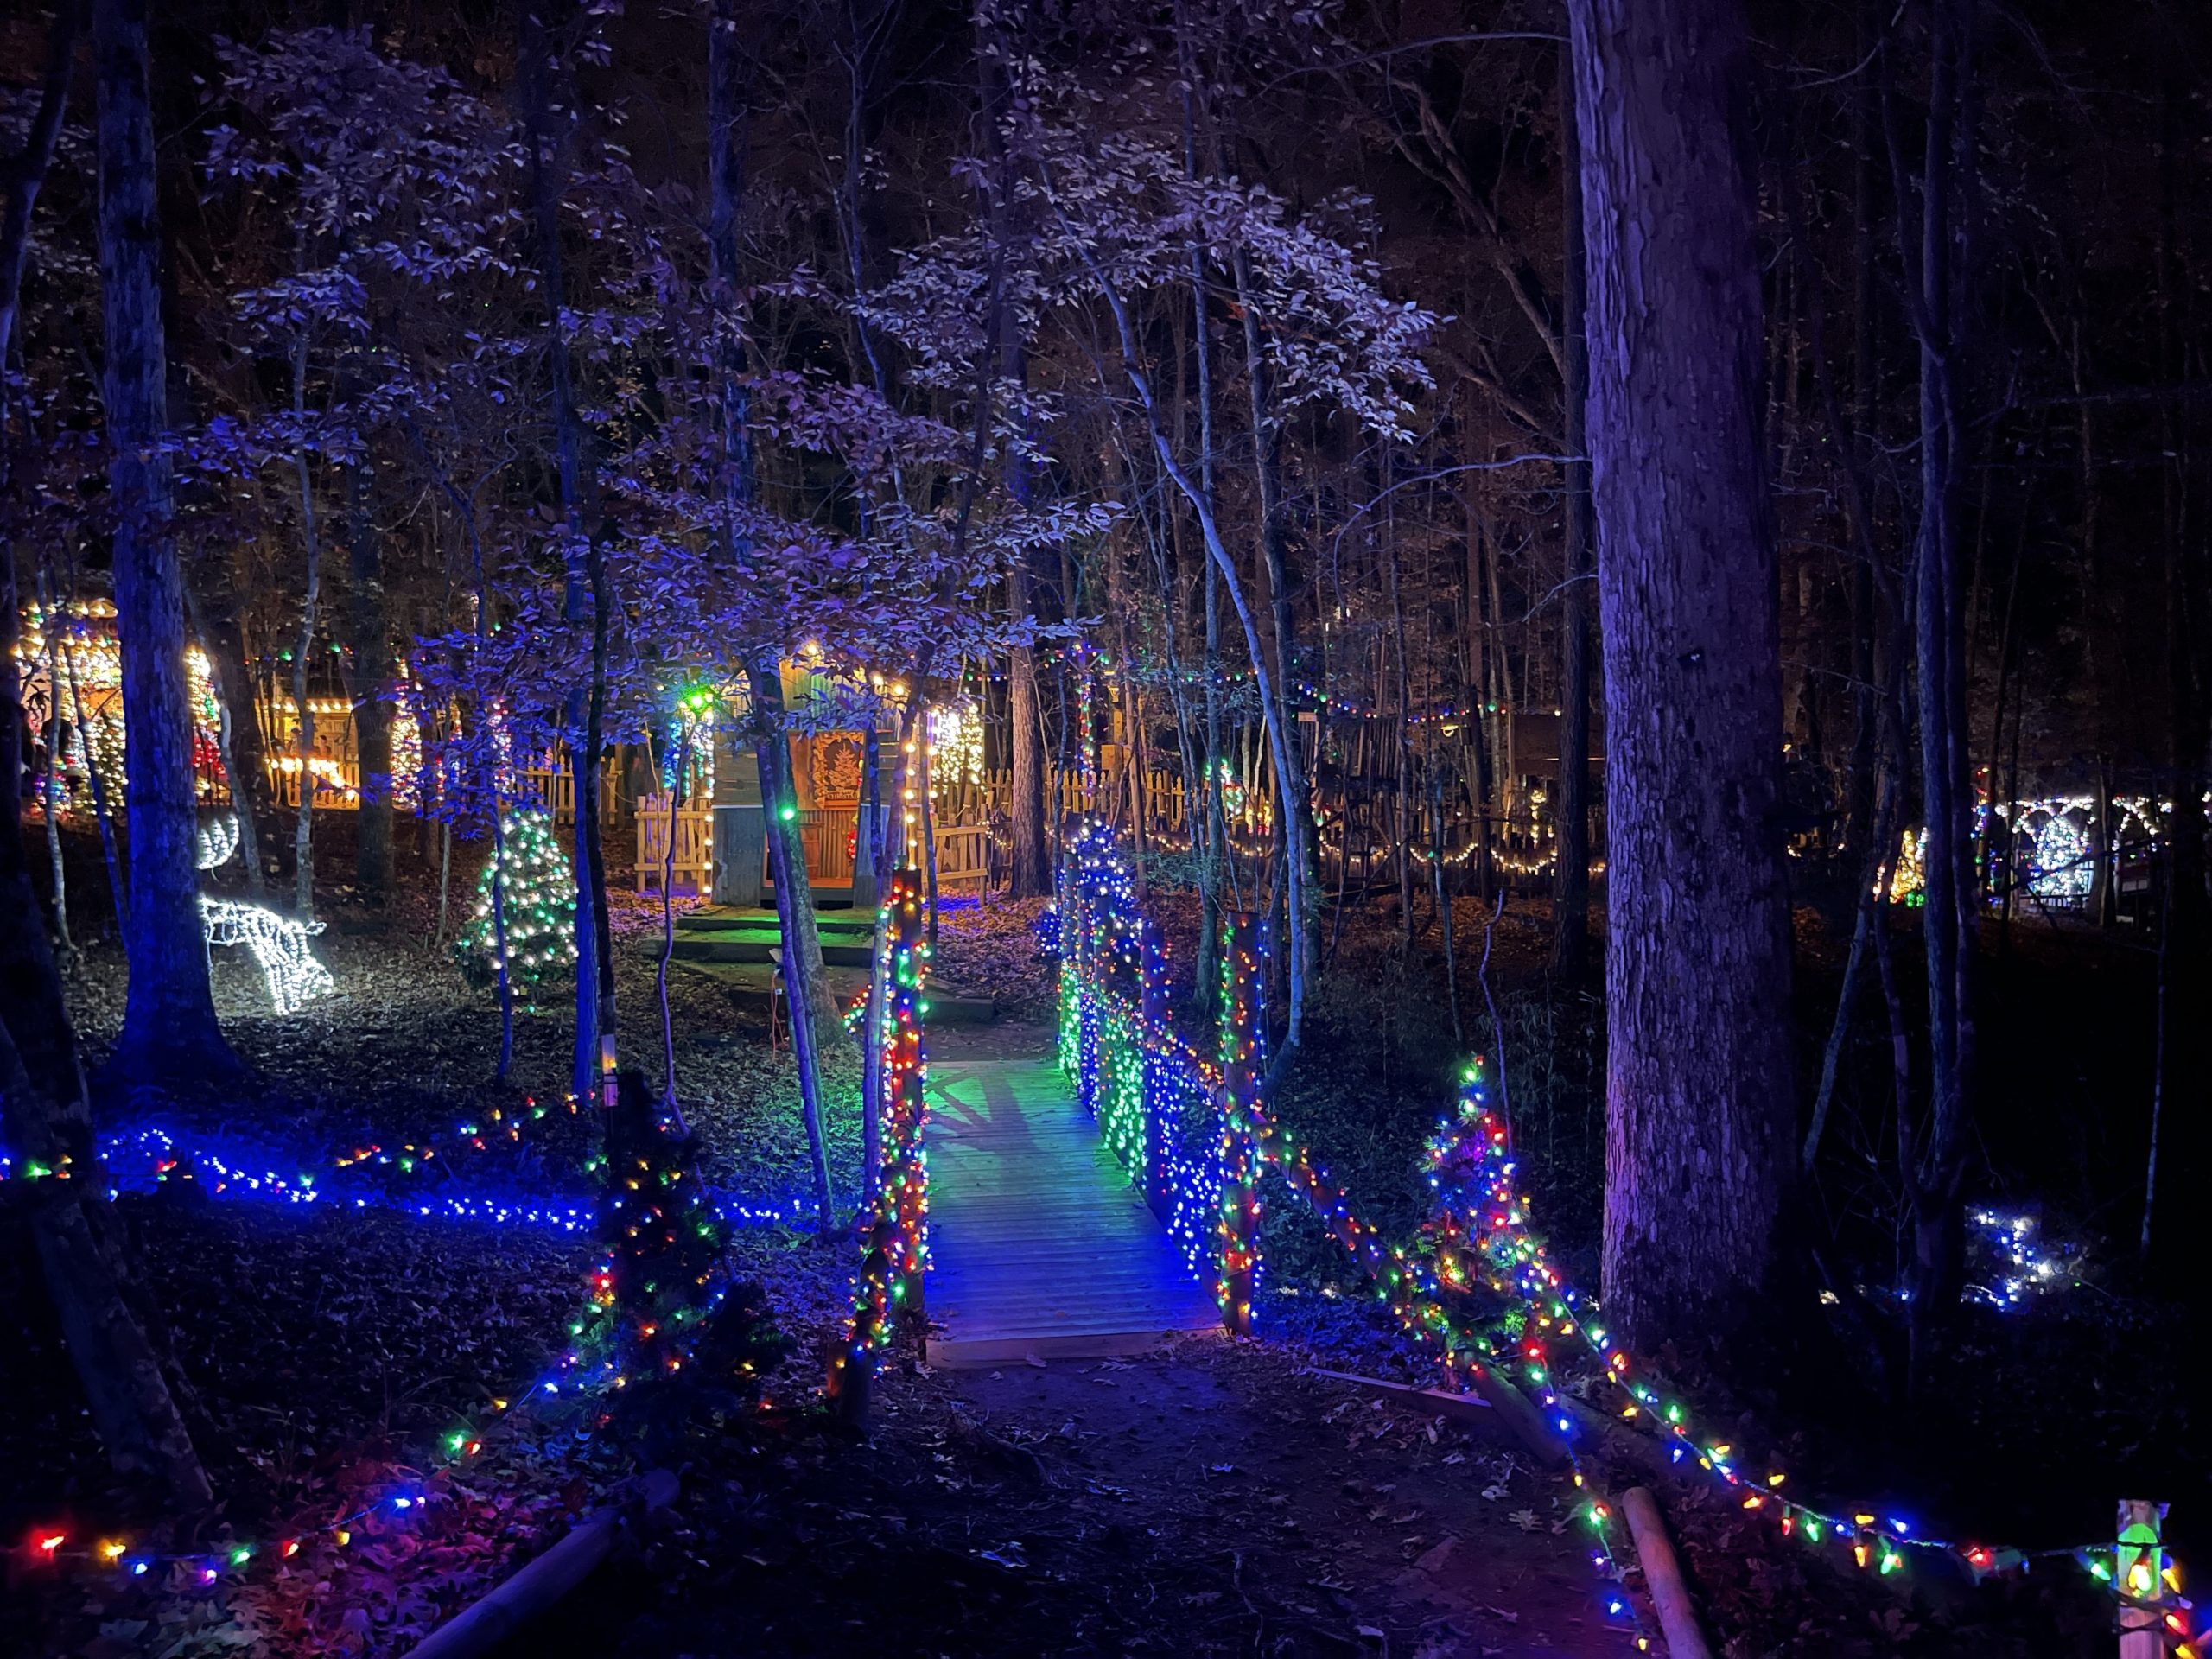 10 FESTIVE WAYS TO CELEBRATE THE NATCHITOCHES CHRISTMAS LIGHTS